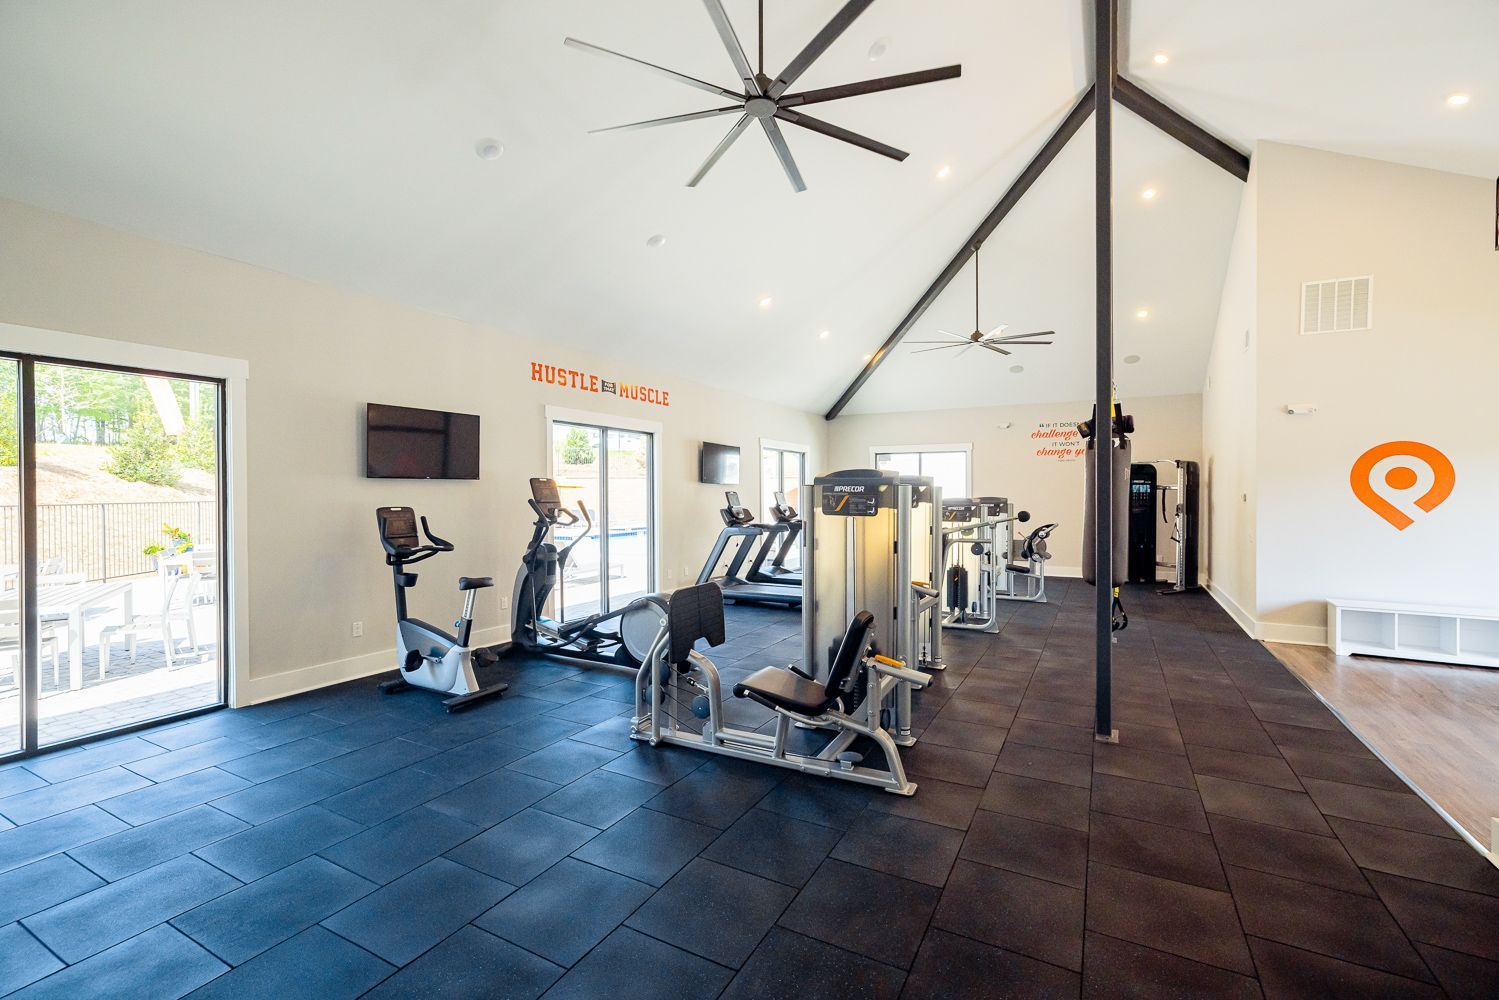 Pointe Grand Kingsland East Apartment Homes 24-Hour fitness center with large ceiling fan and workout machines.